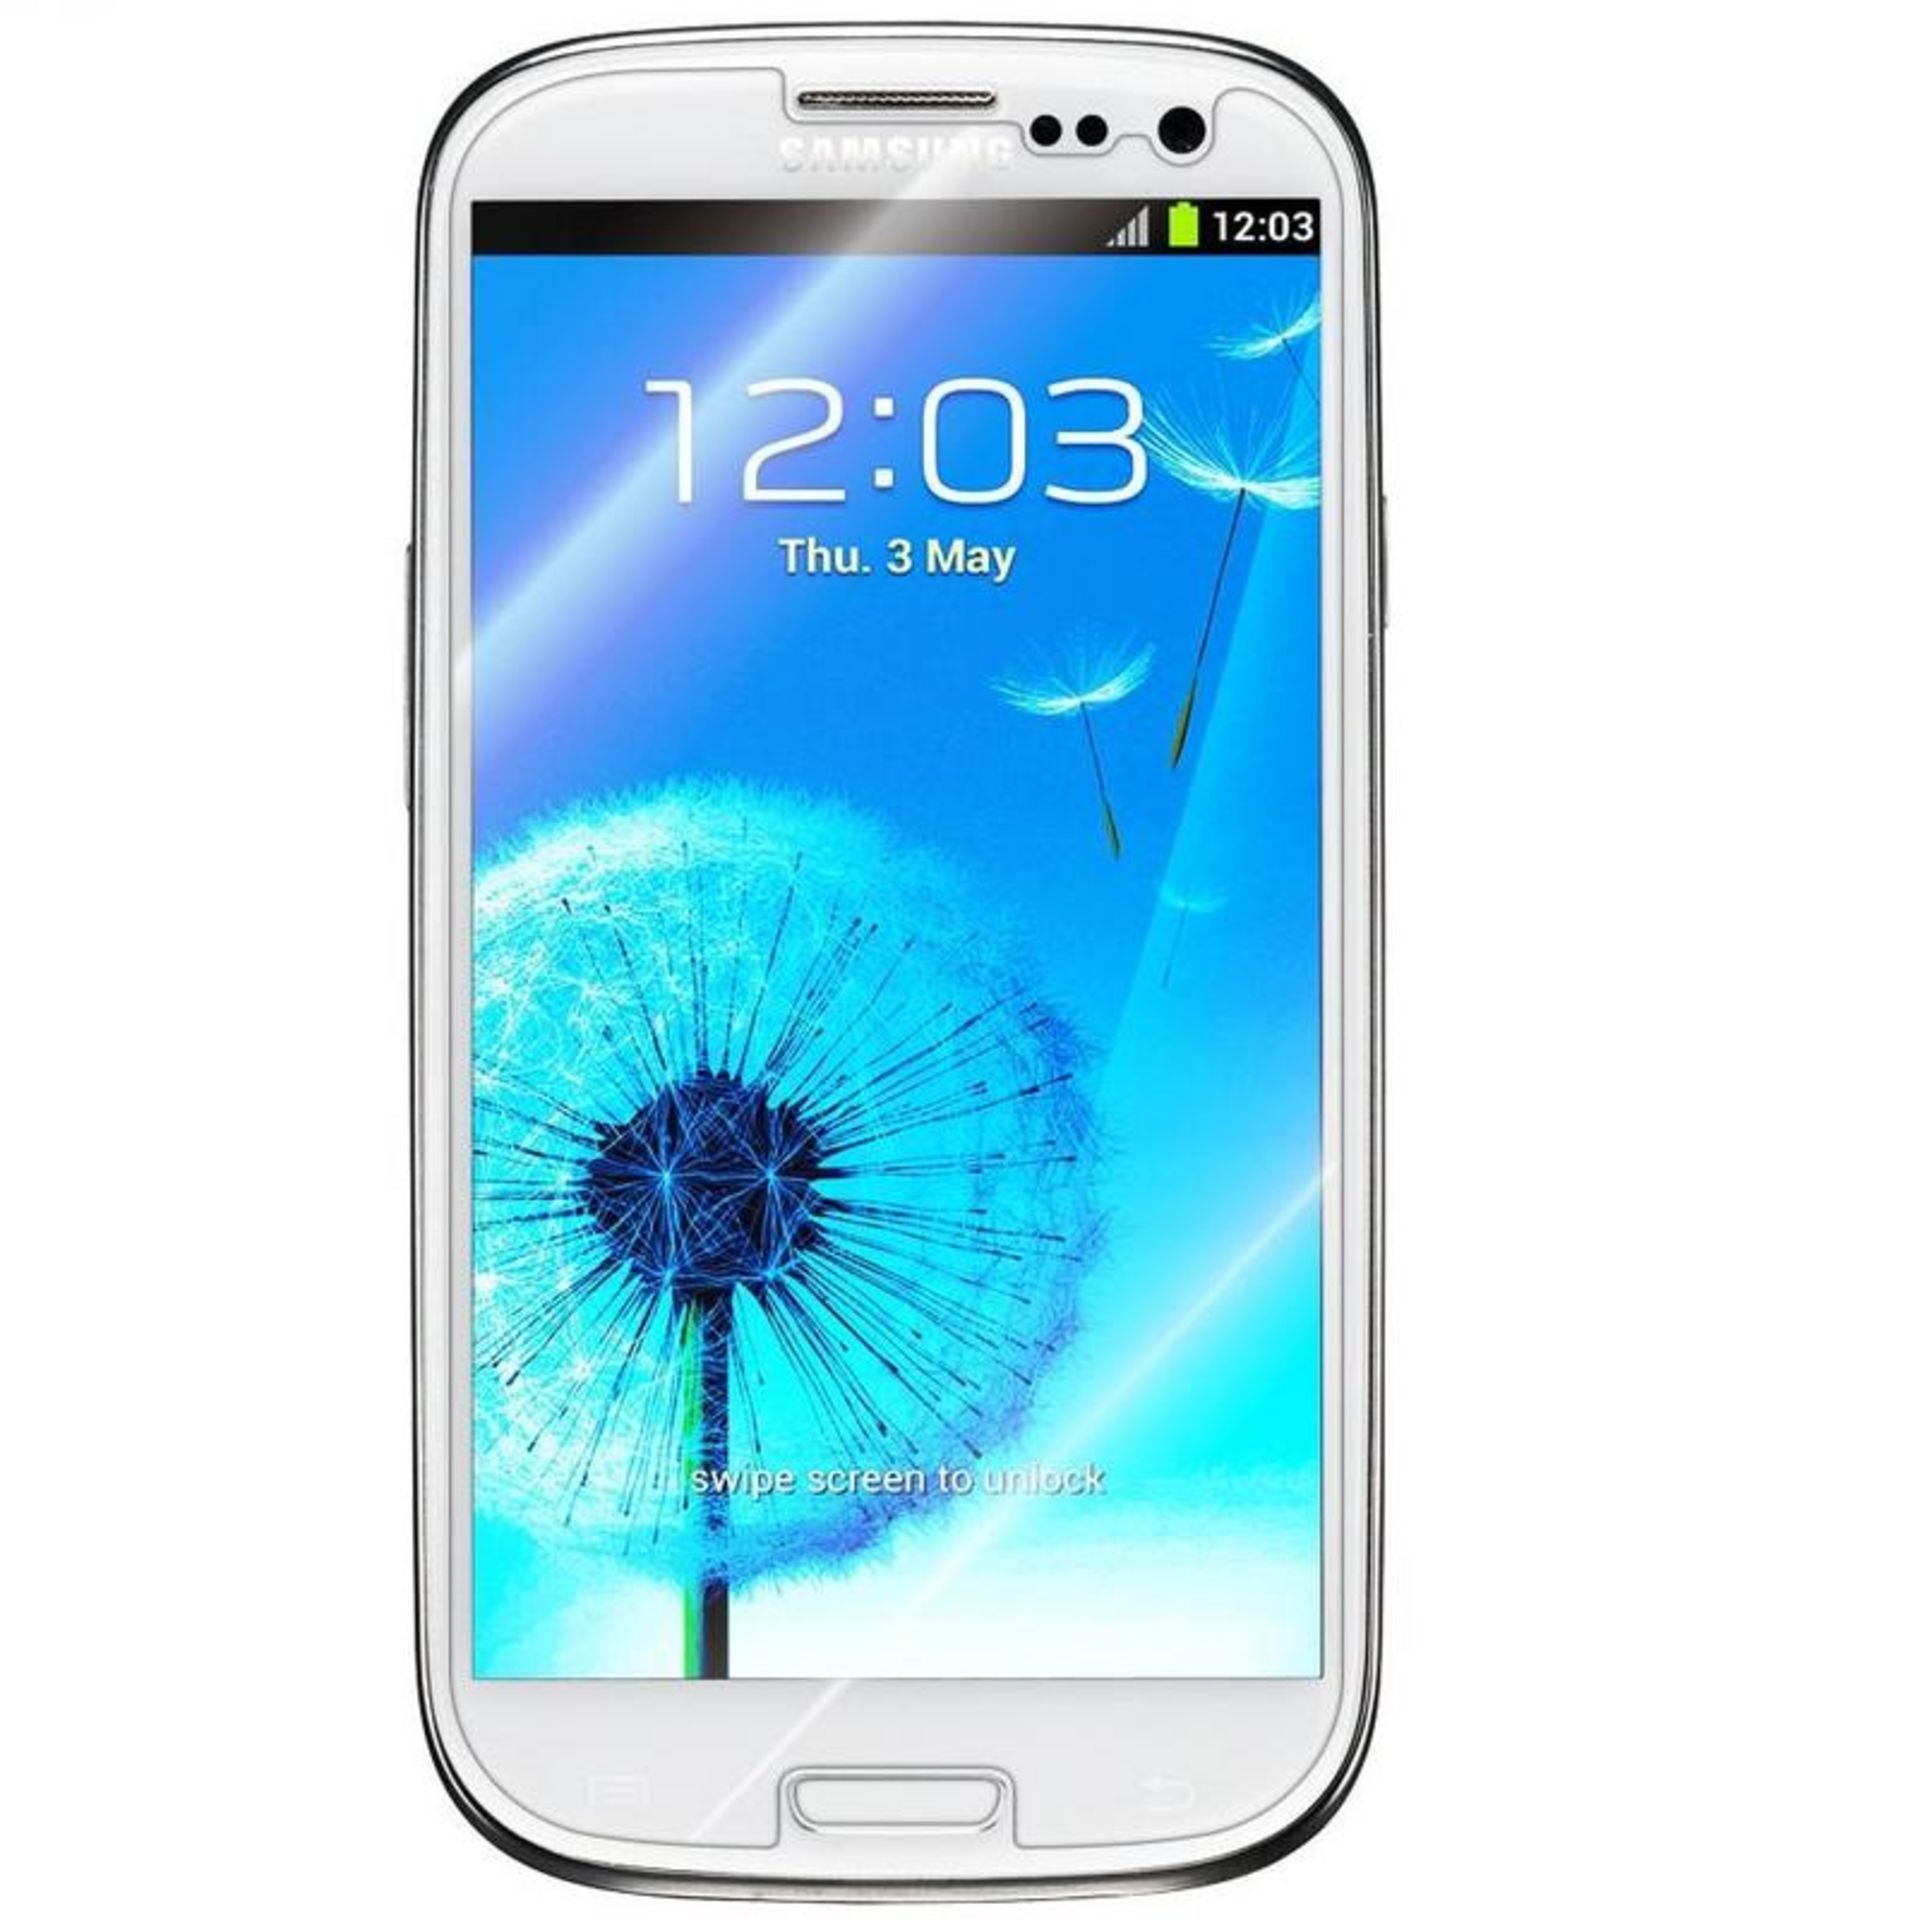 Grade A Samsung S3(i9300) Colours May Vary Item available approx 12 working days after sale